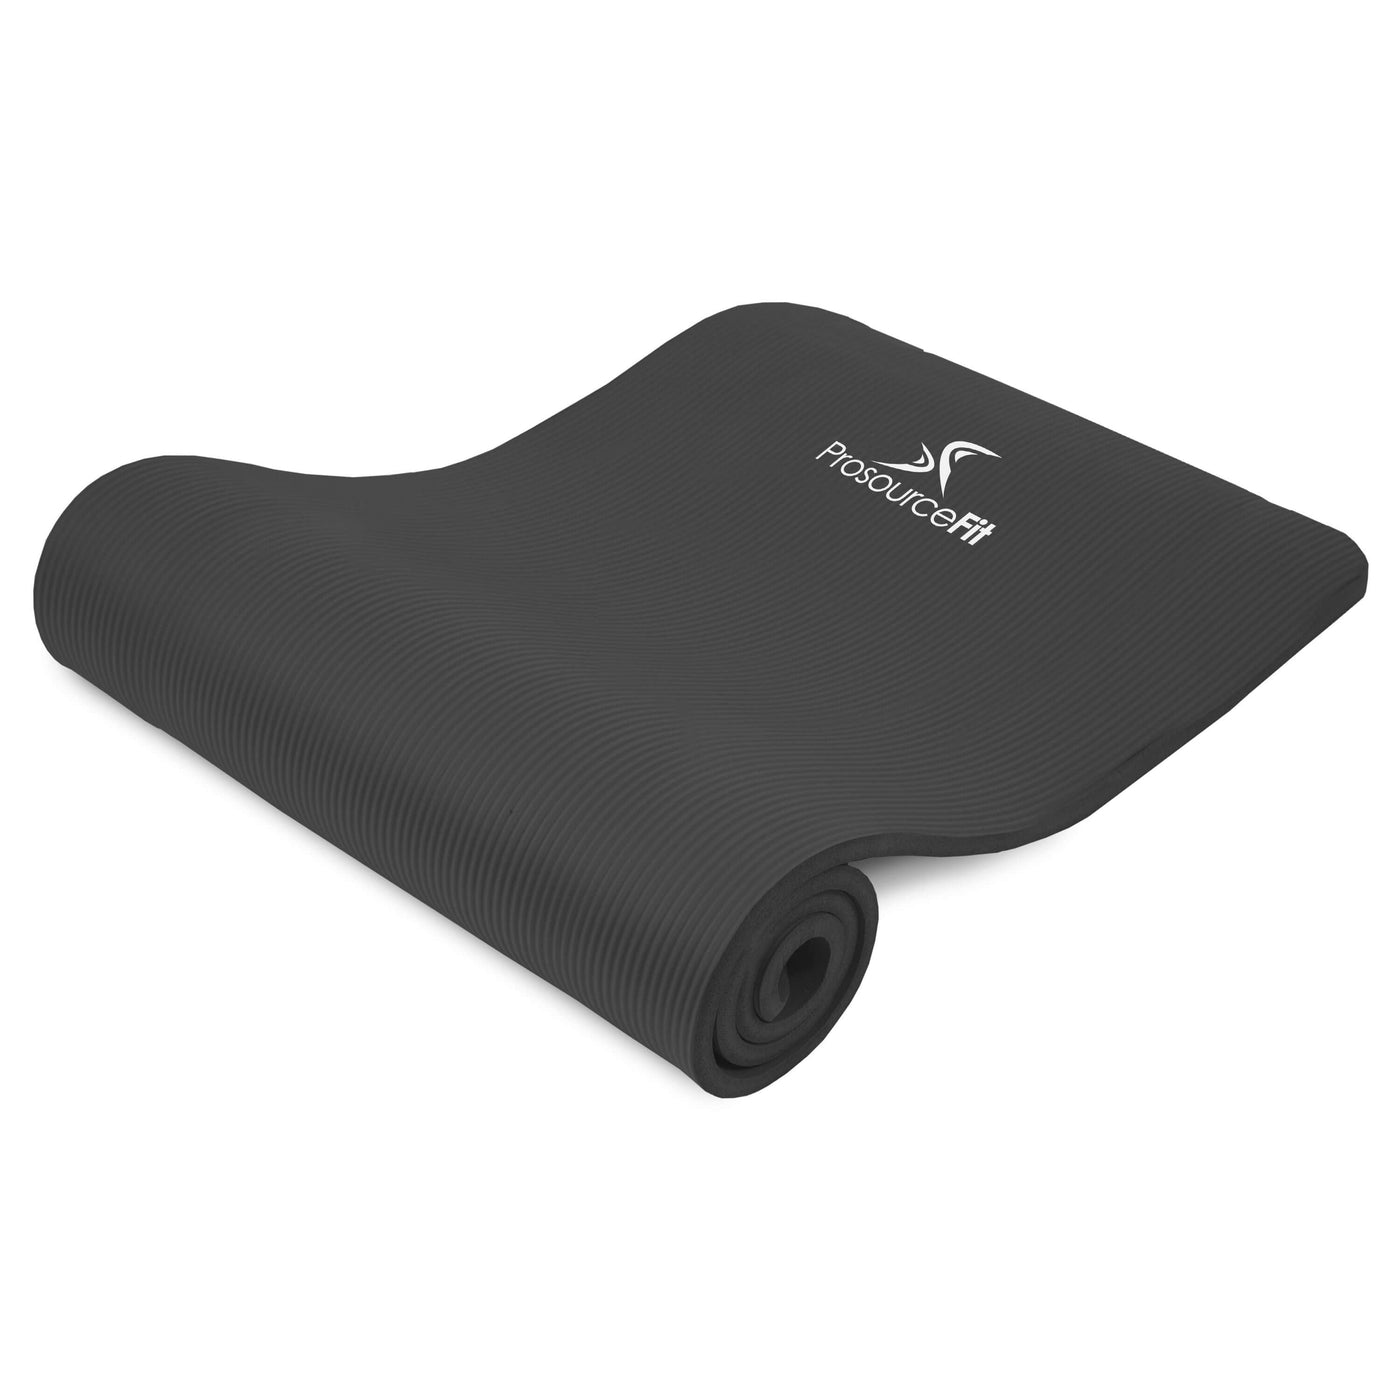 Extra Thick Yoga and Pilates Mat 1/2 inch by Jupiter Gear